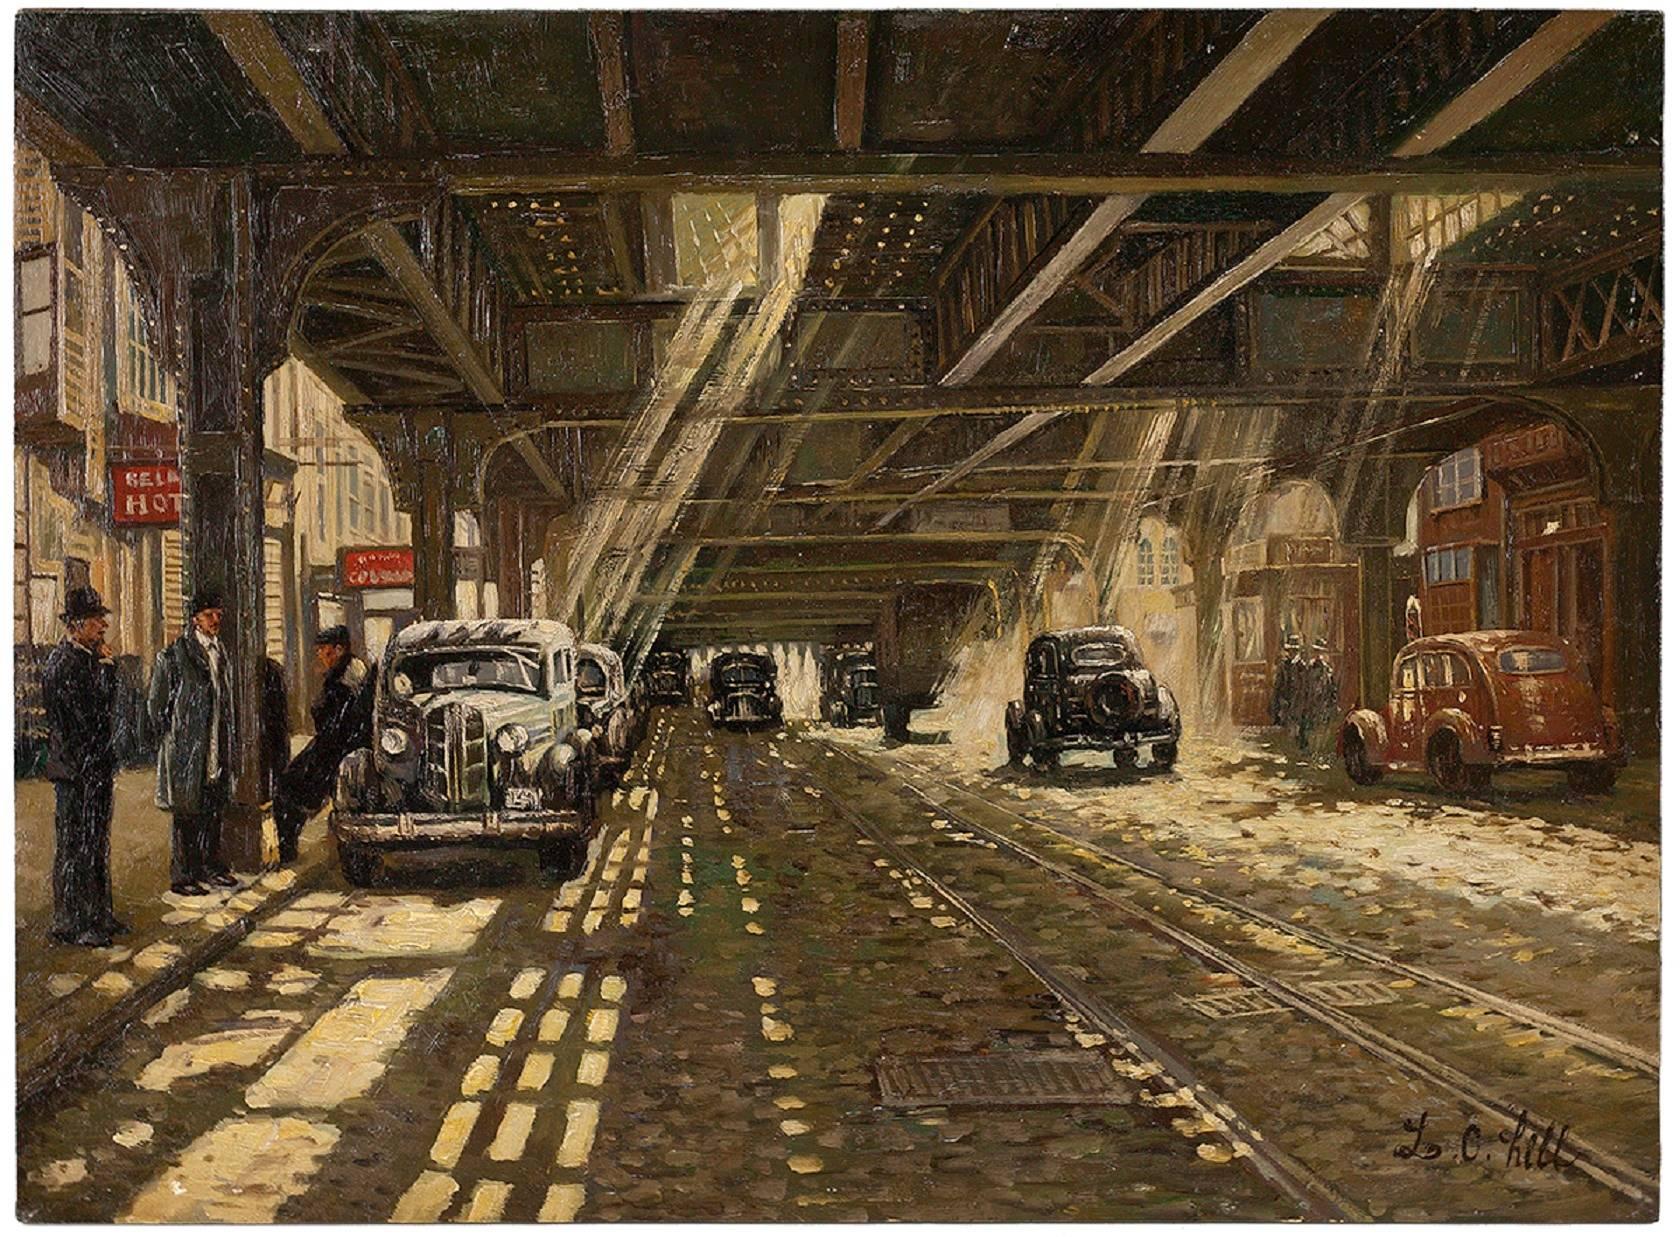 Unknown Figurative Painting - NYC "Under the El" 1940s Urban Street Scene